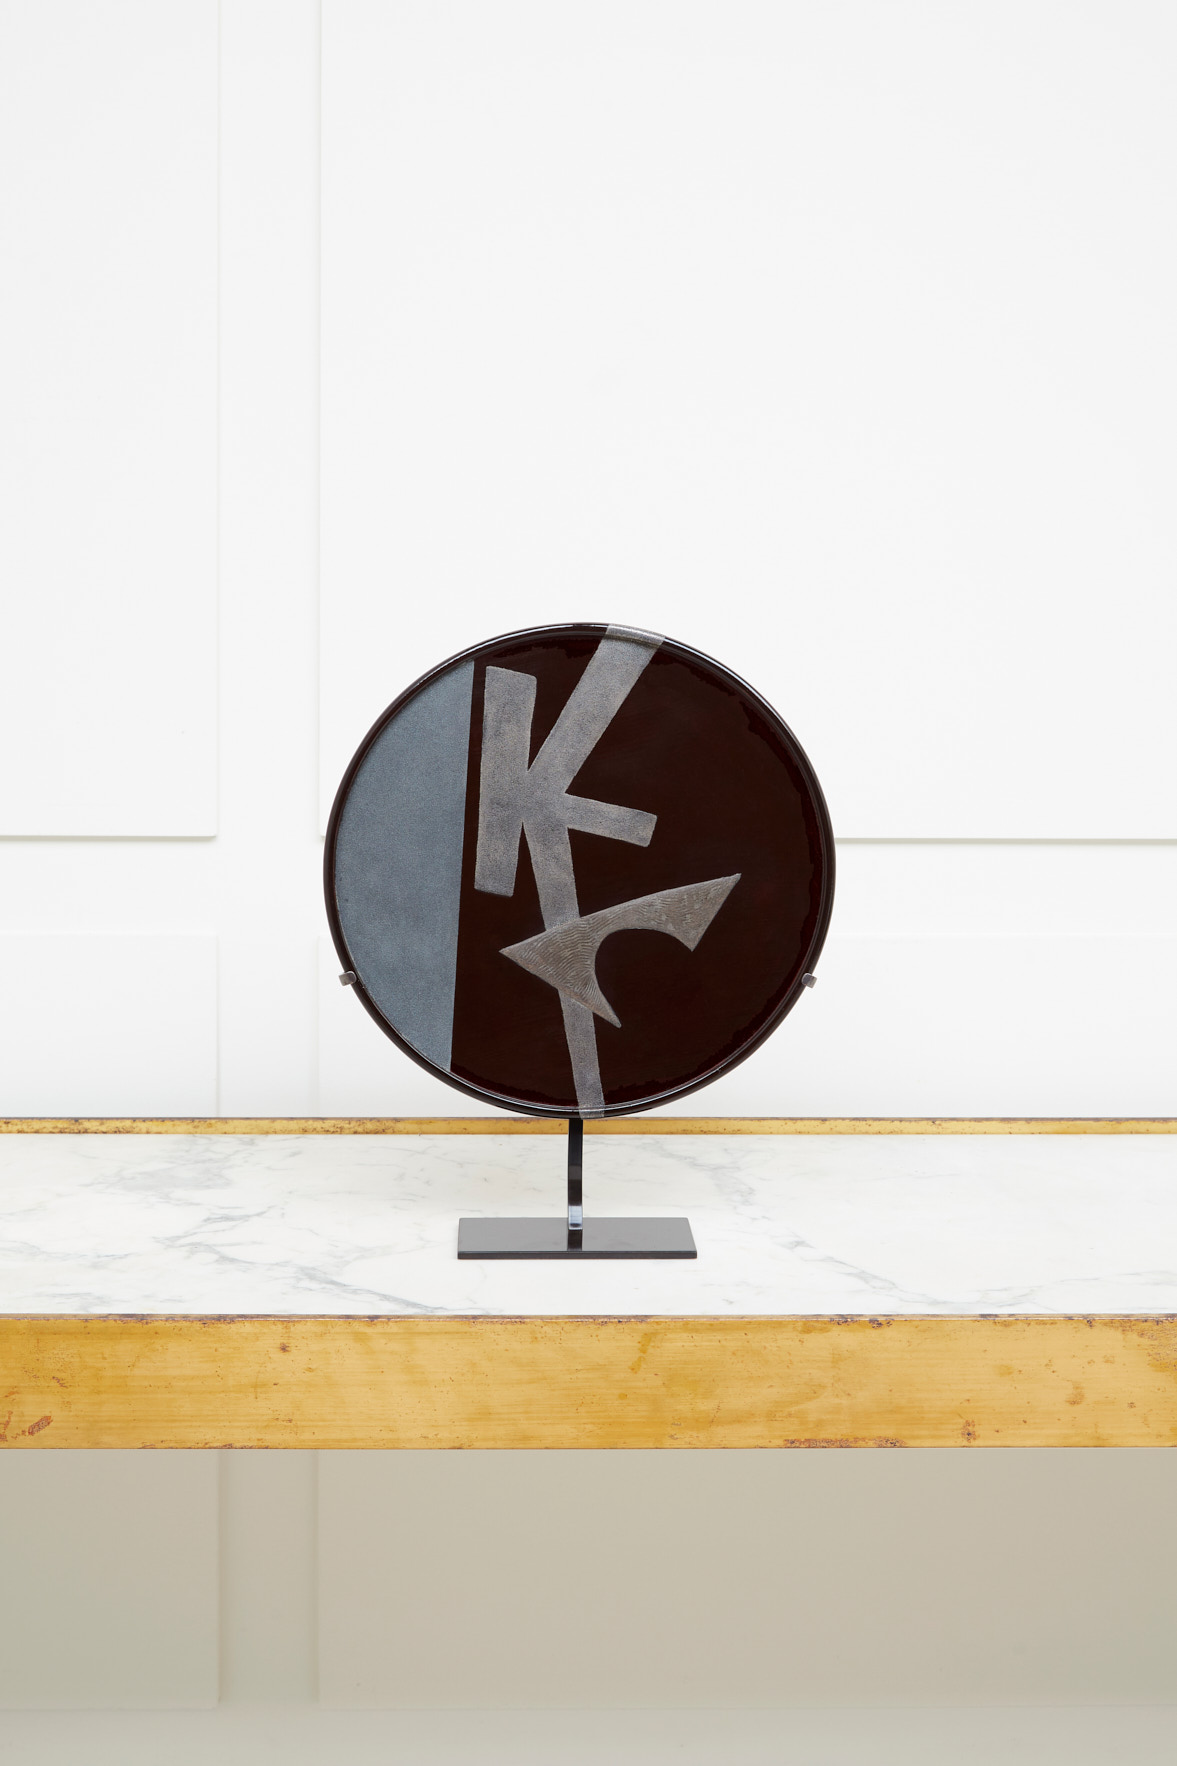 Eileen Gray, Lacquered plate, vue 01